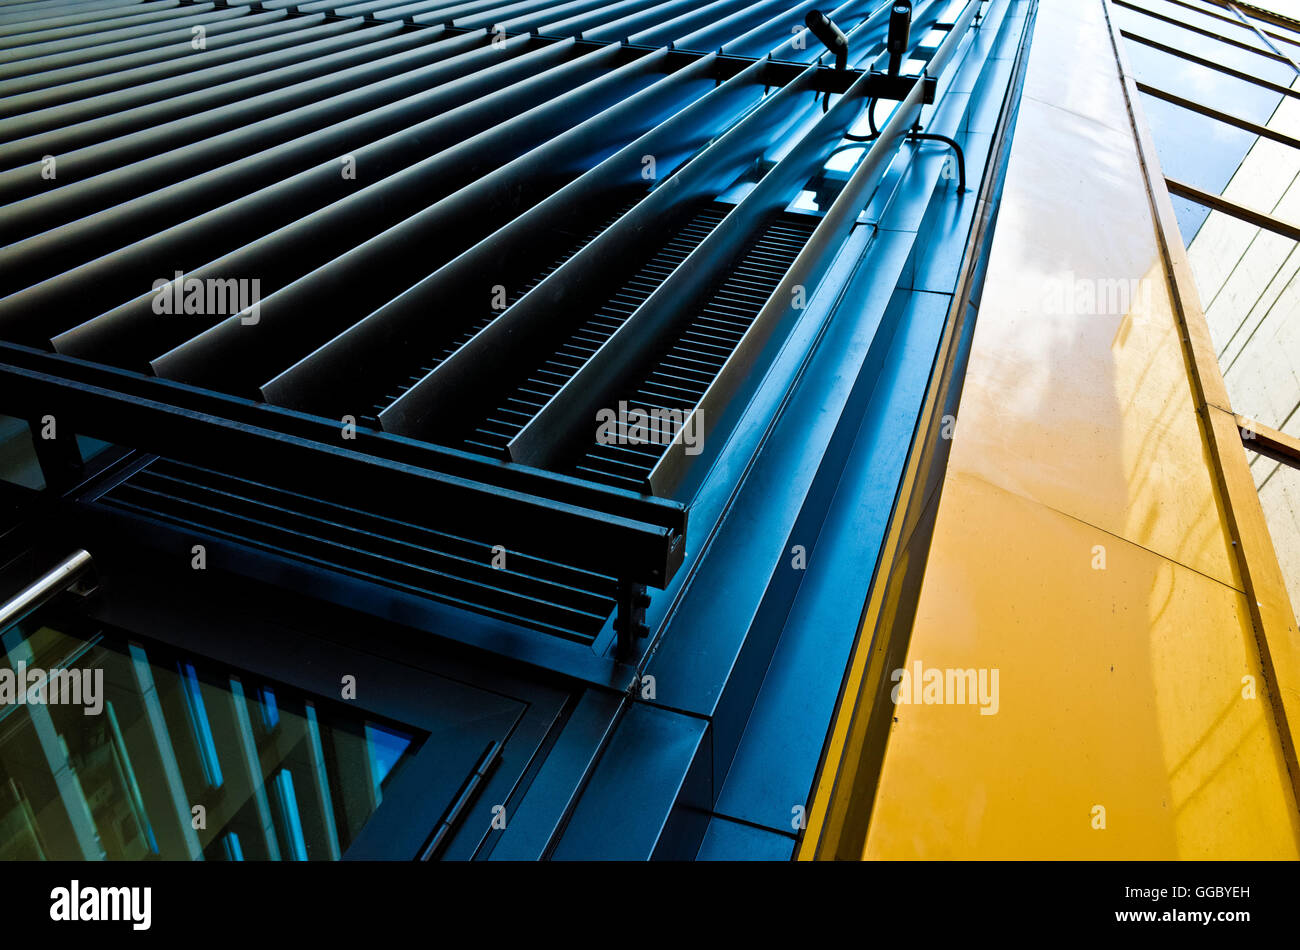 modern abstract architecture Stock Photo